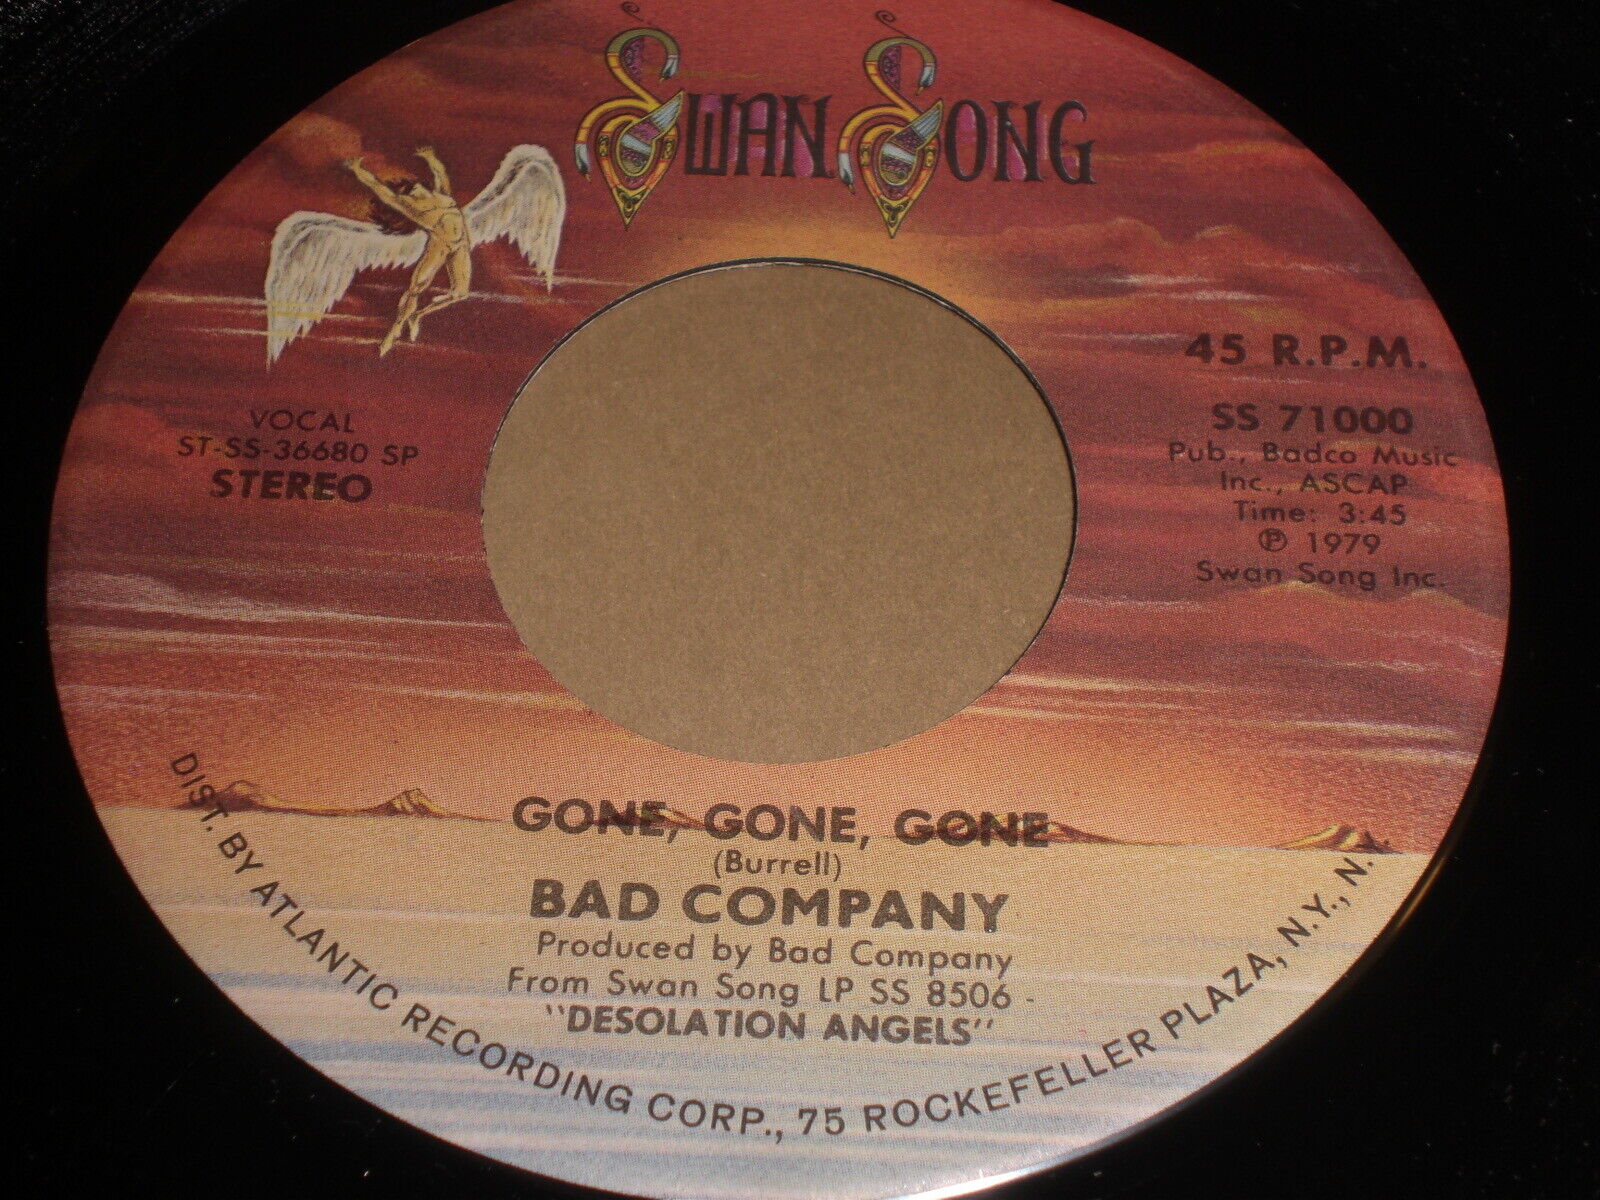 Bad Company - Gone, Gone, Gone / Take The Time 45 - Swan Song